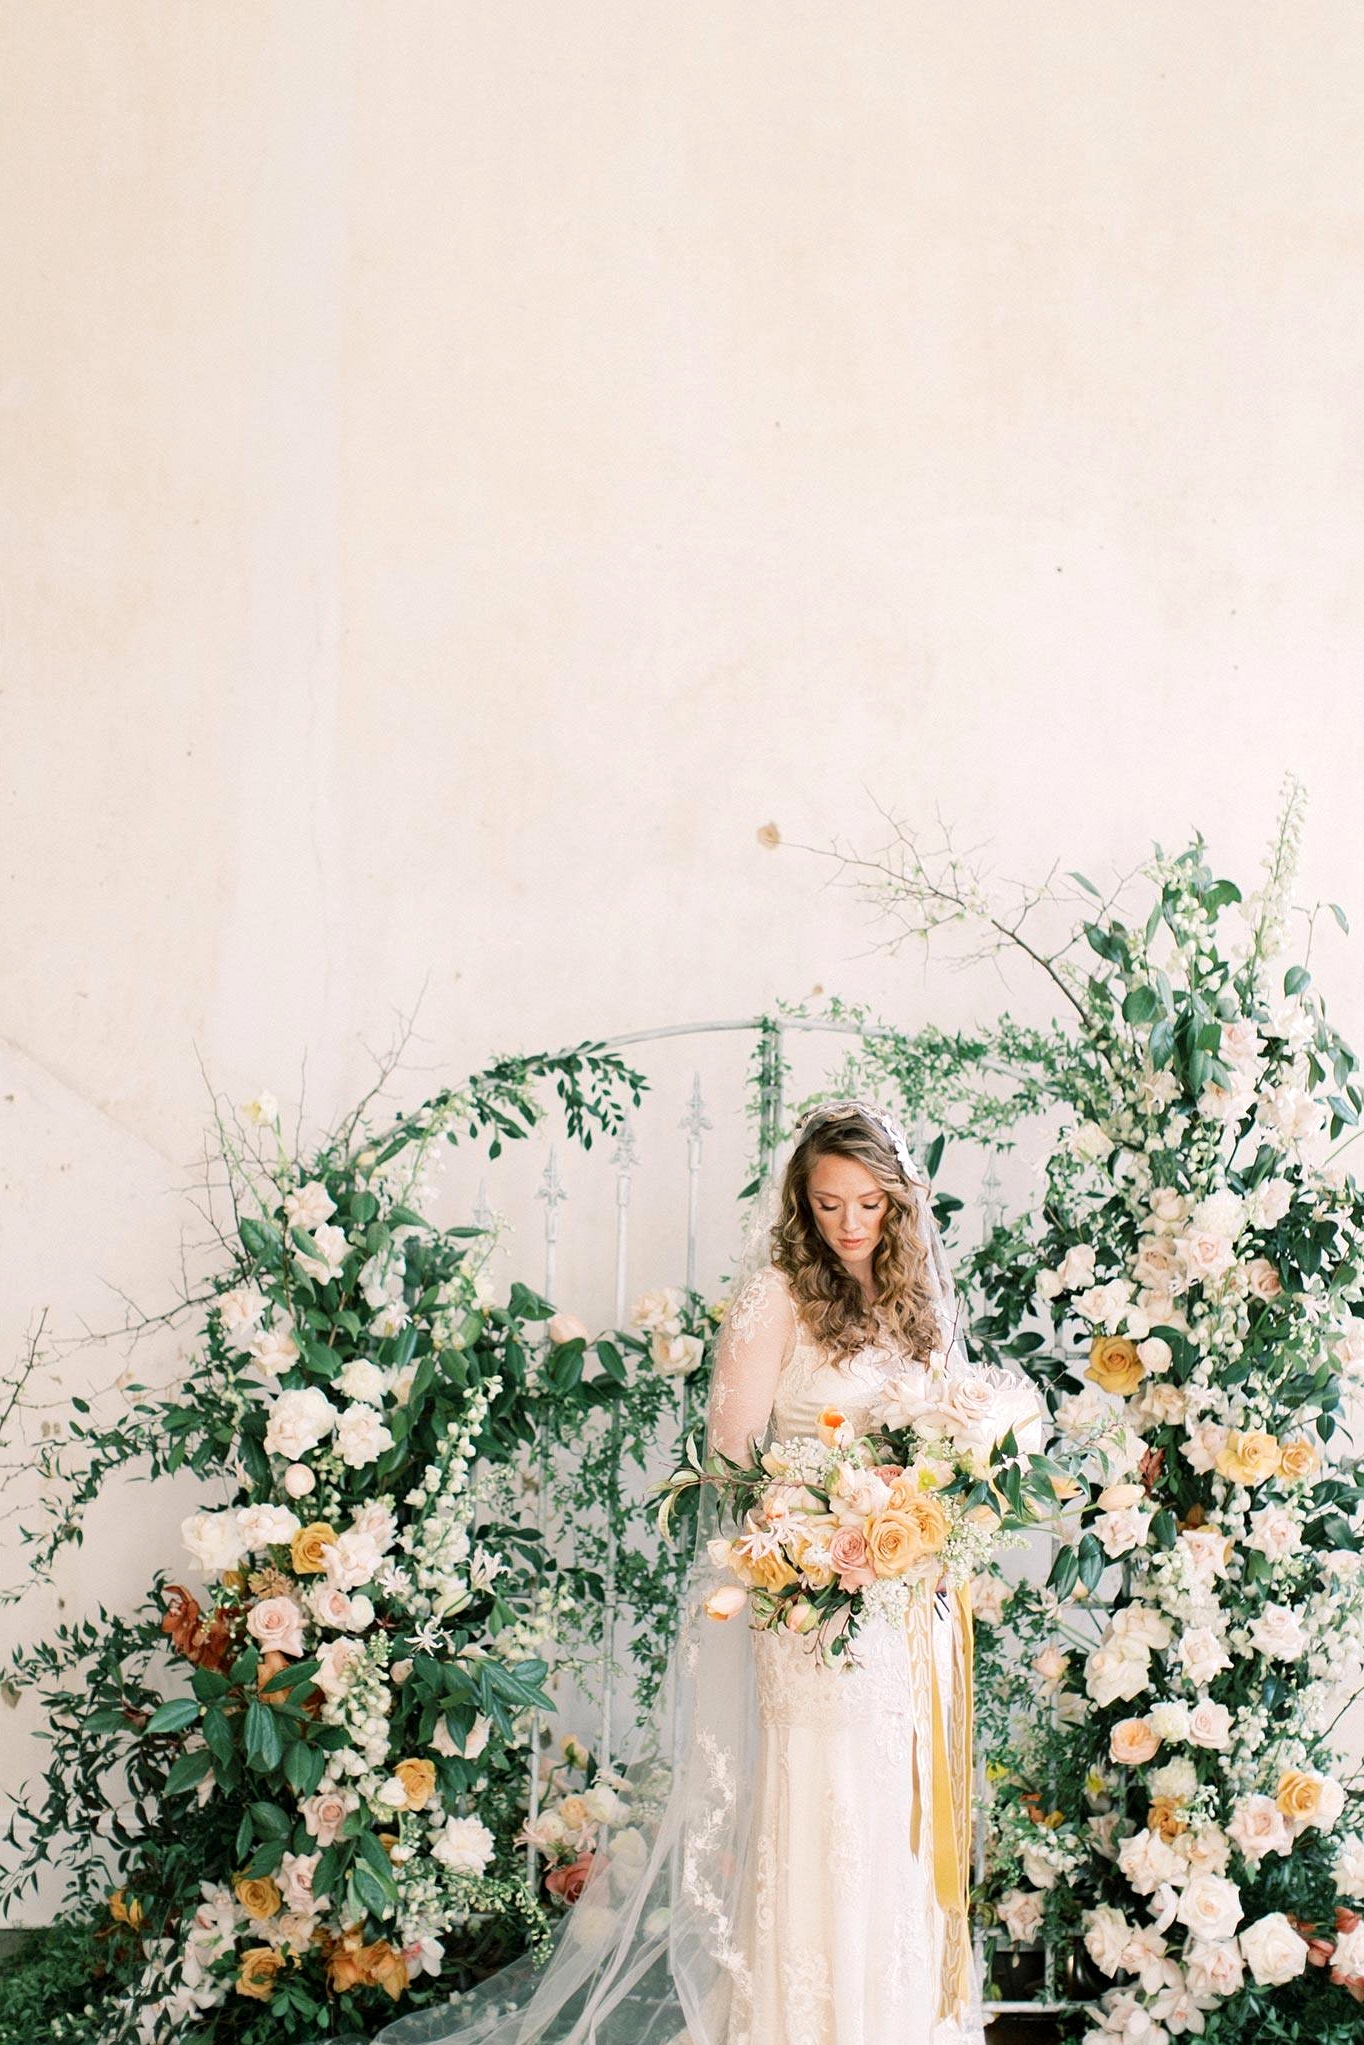 lush floral gate wedding backdrop with bride in a vintage-inspired wedding dress holding a yellow and white spring bridal bouquet